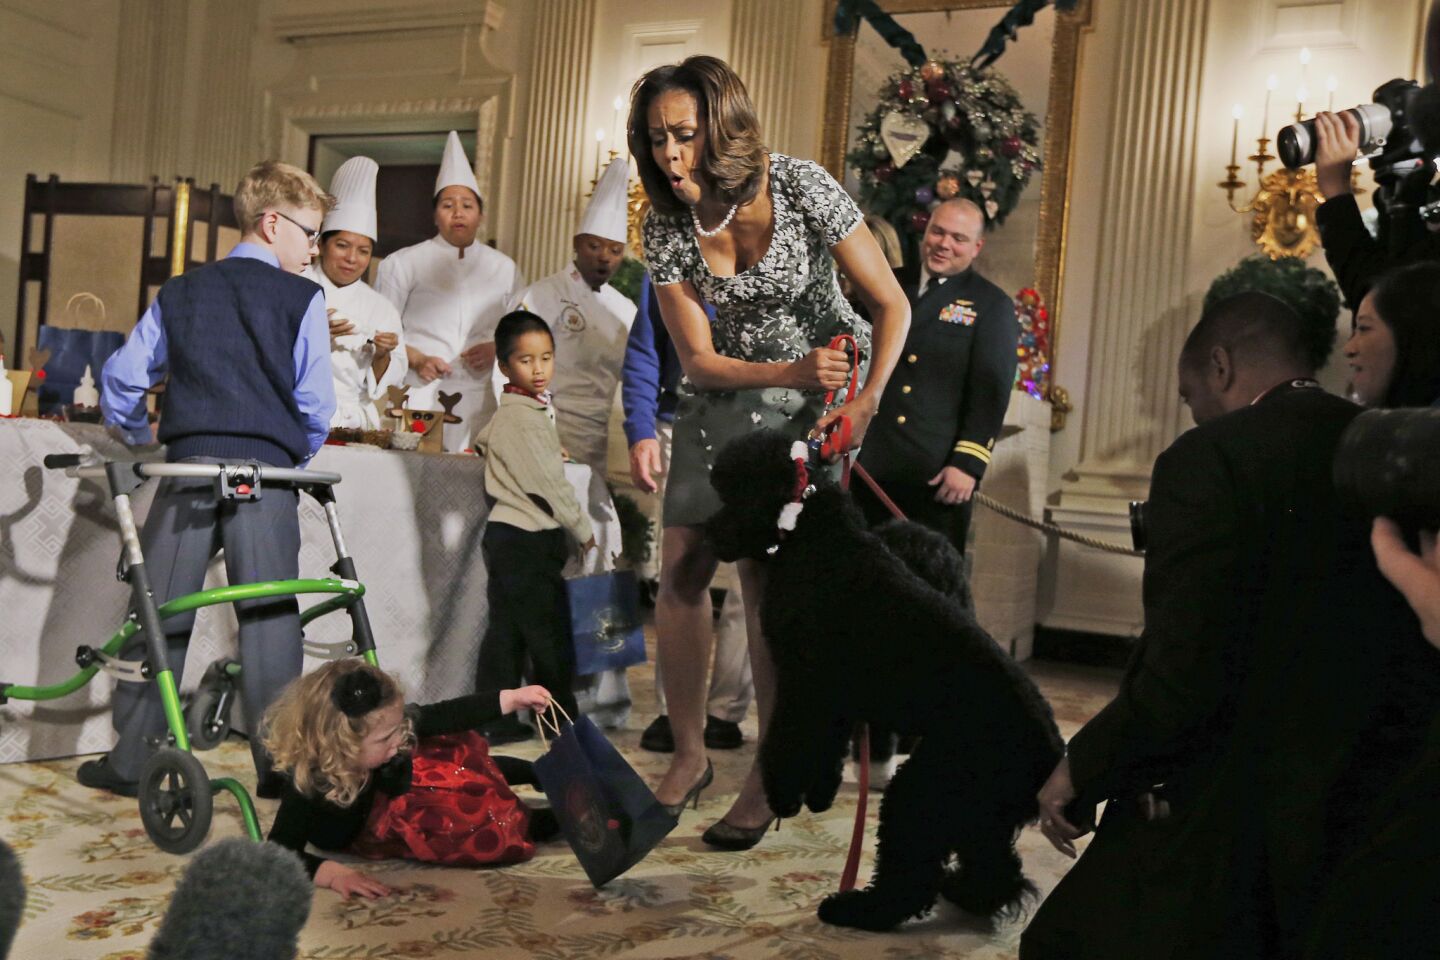 First lady Michelle Obama pulls back the family dog Sunny after Ashtyn Gardner, 2, from Mobile, Ala., lost her balance during a holiday arts and crafts event at the White House.